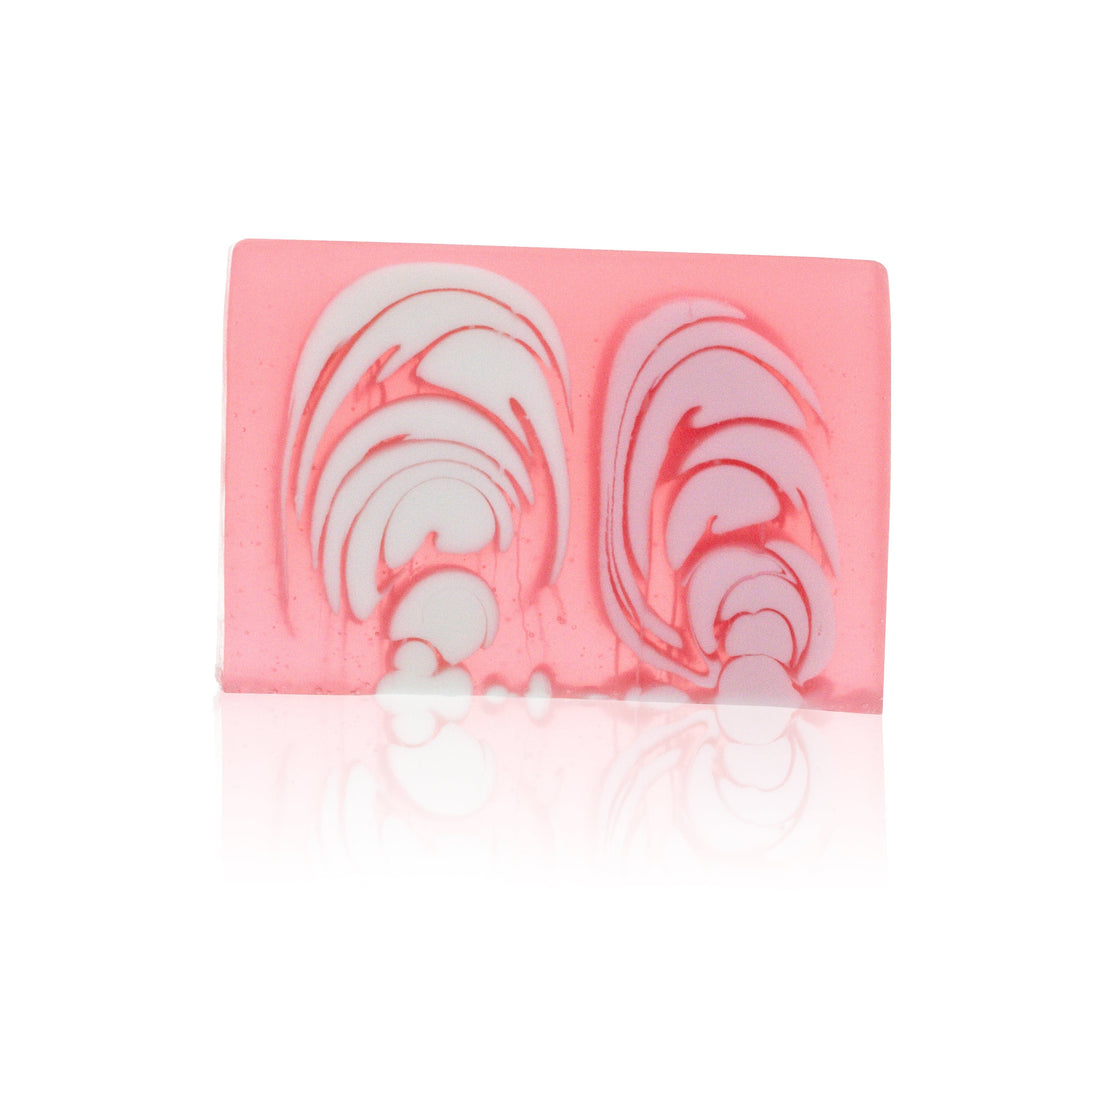 Hand-crafted Soap - Rose - best price from Maltashopper.com HSBS-12